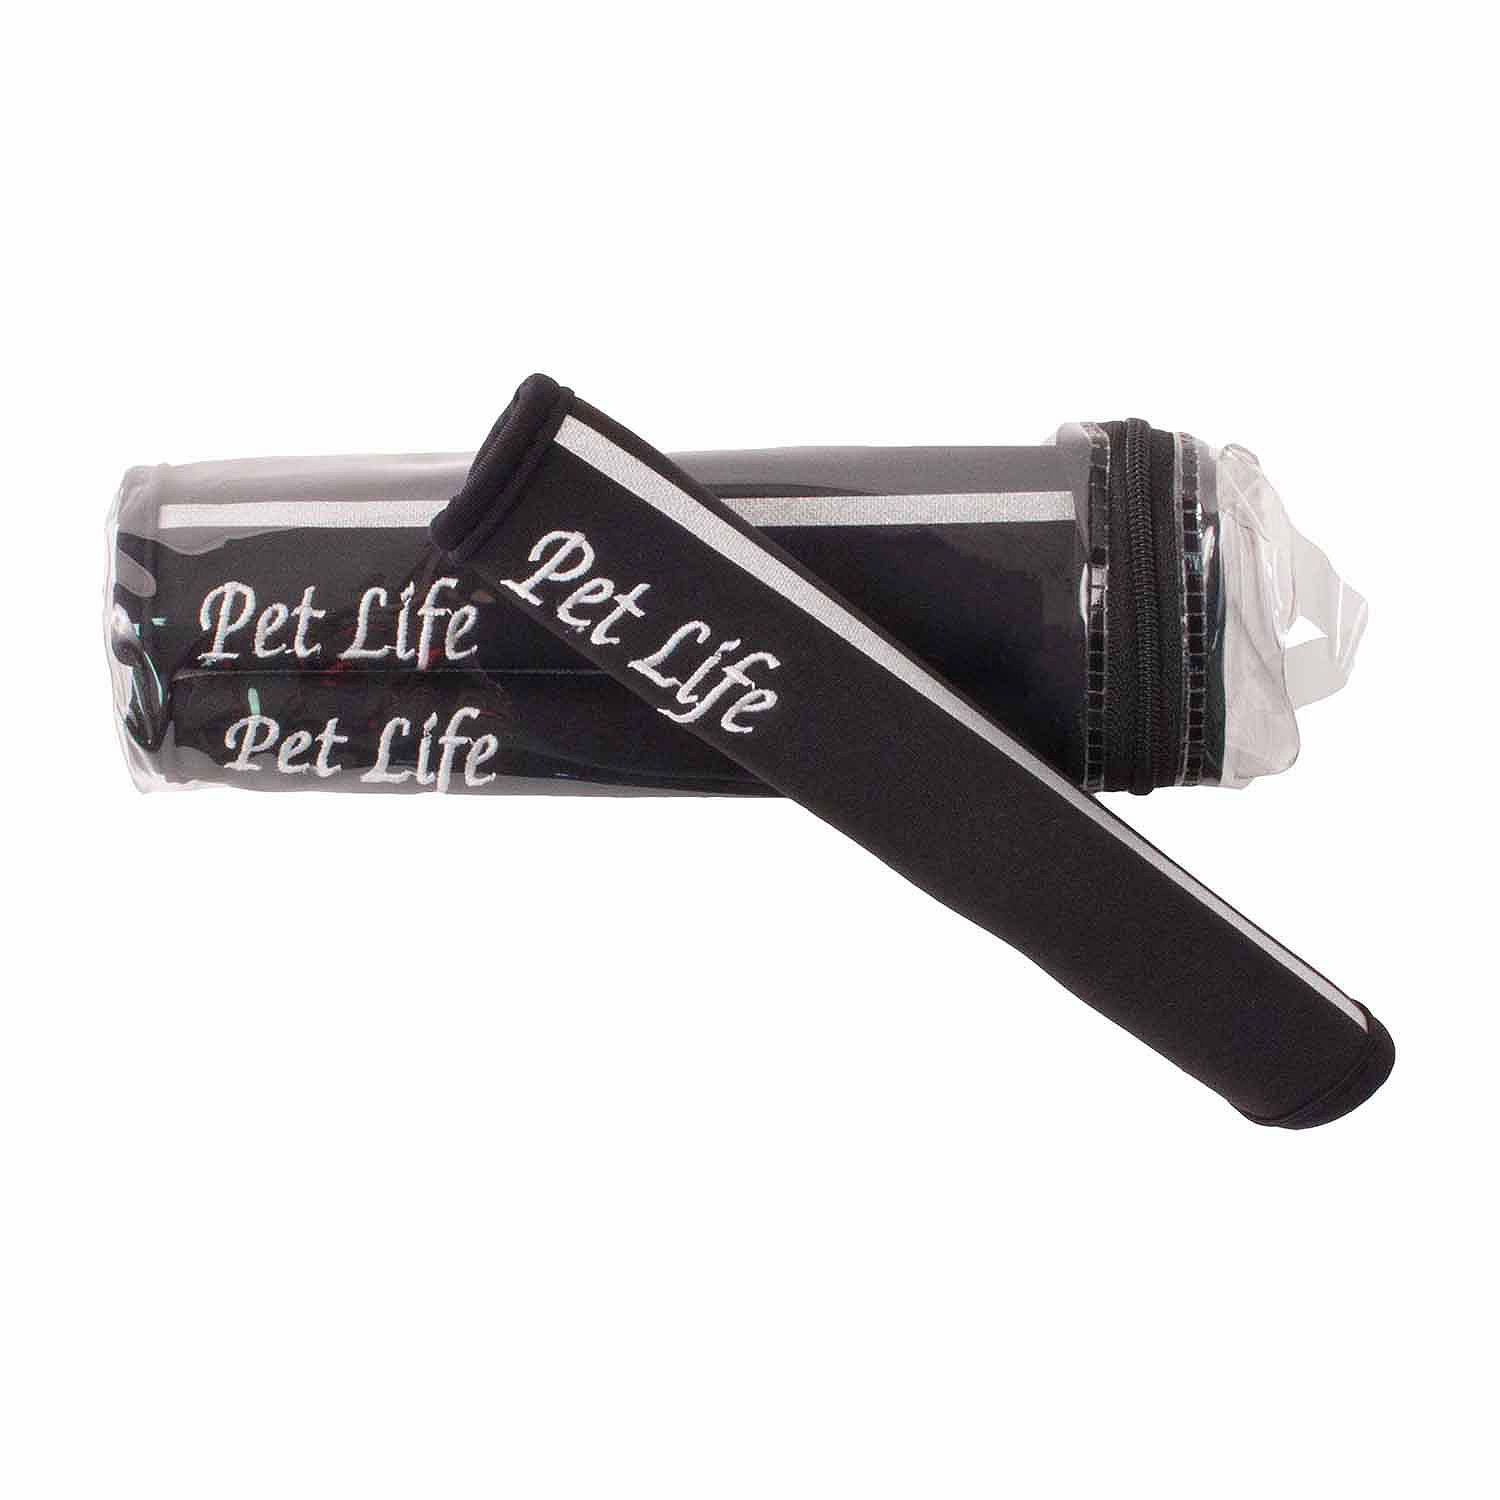 The Pet Life Extreme-Neoprene Joint Protective Reflective Pet Sleeves ...